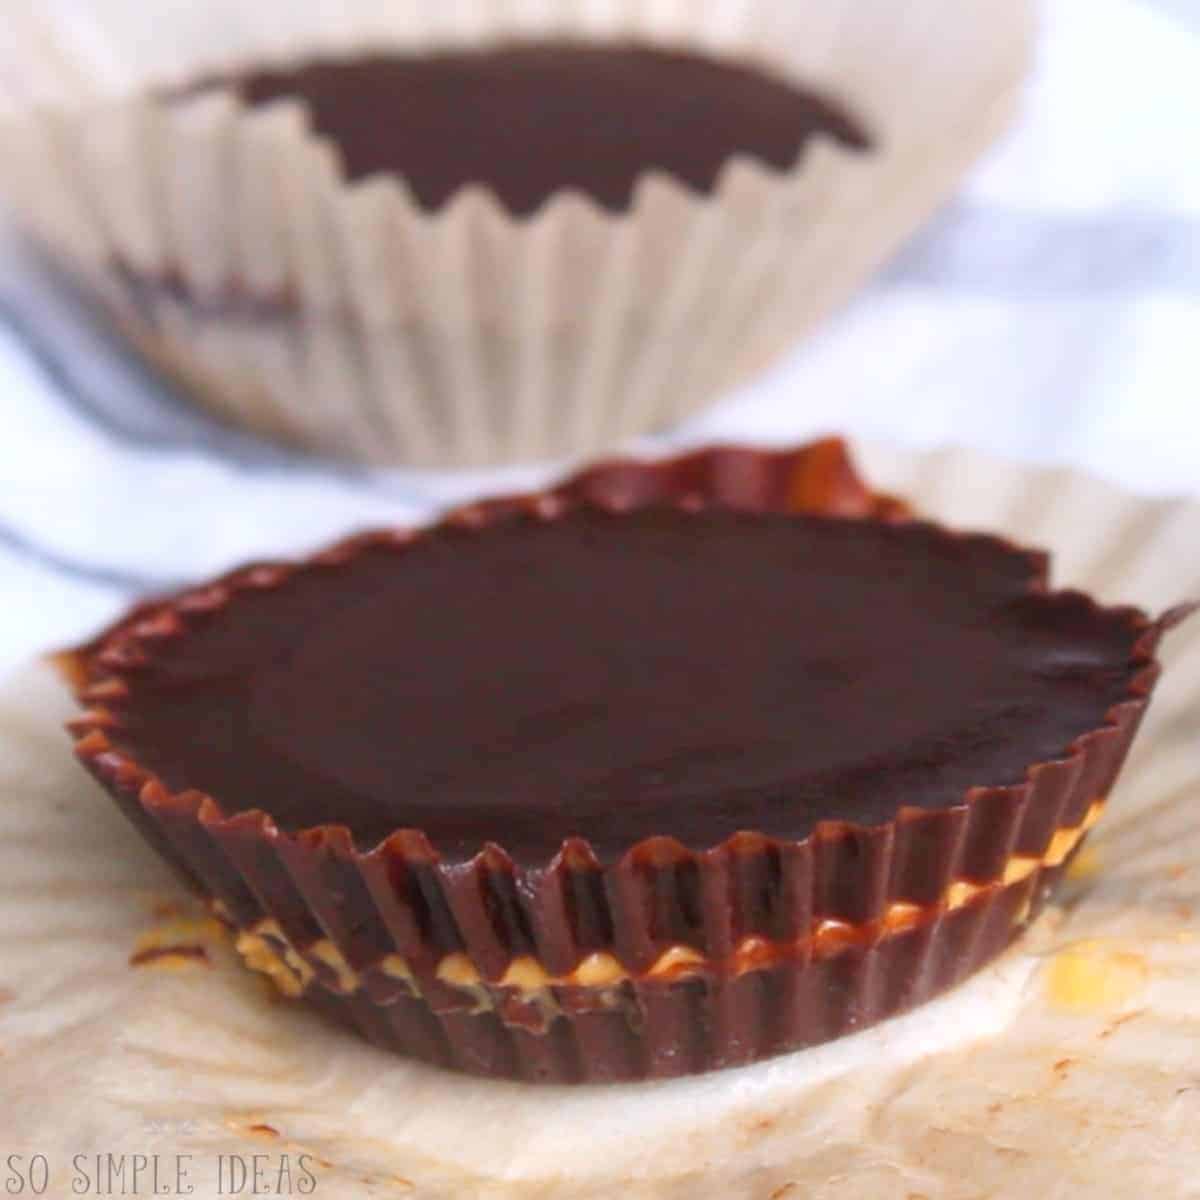 unwrapping peanut butter cup after set